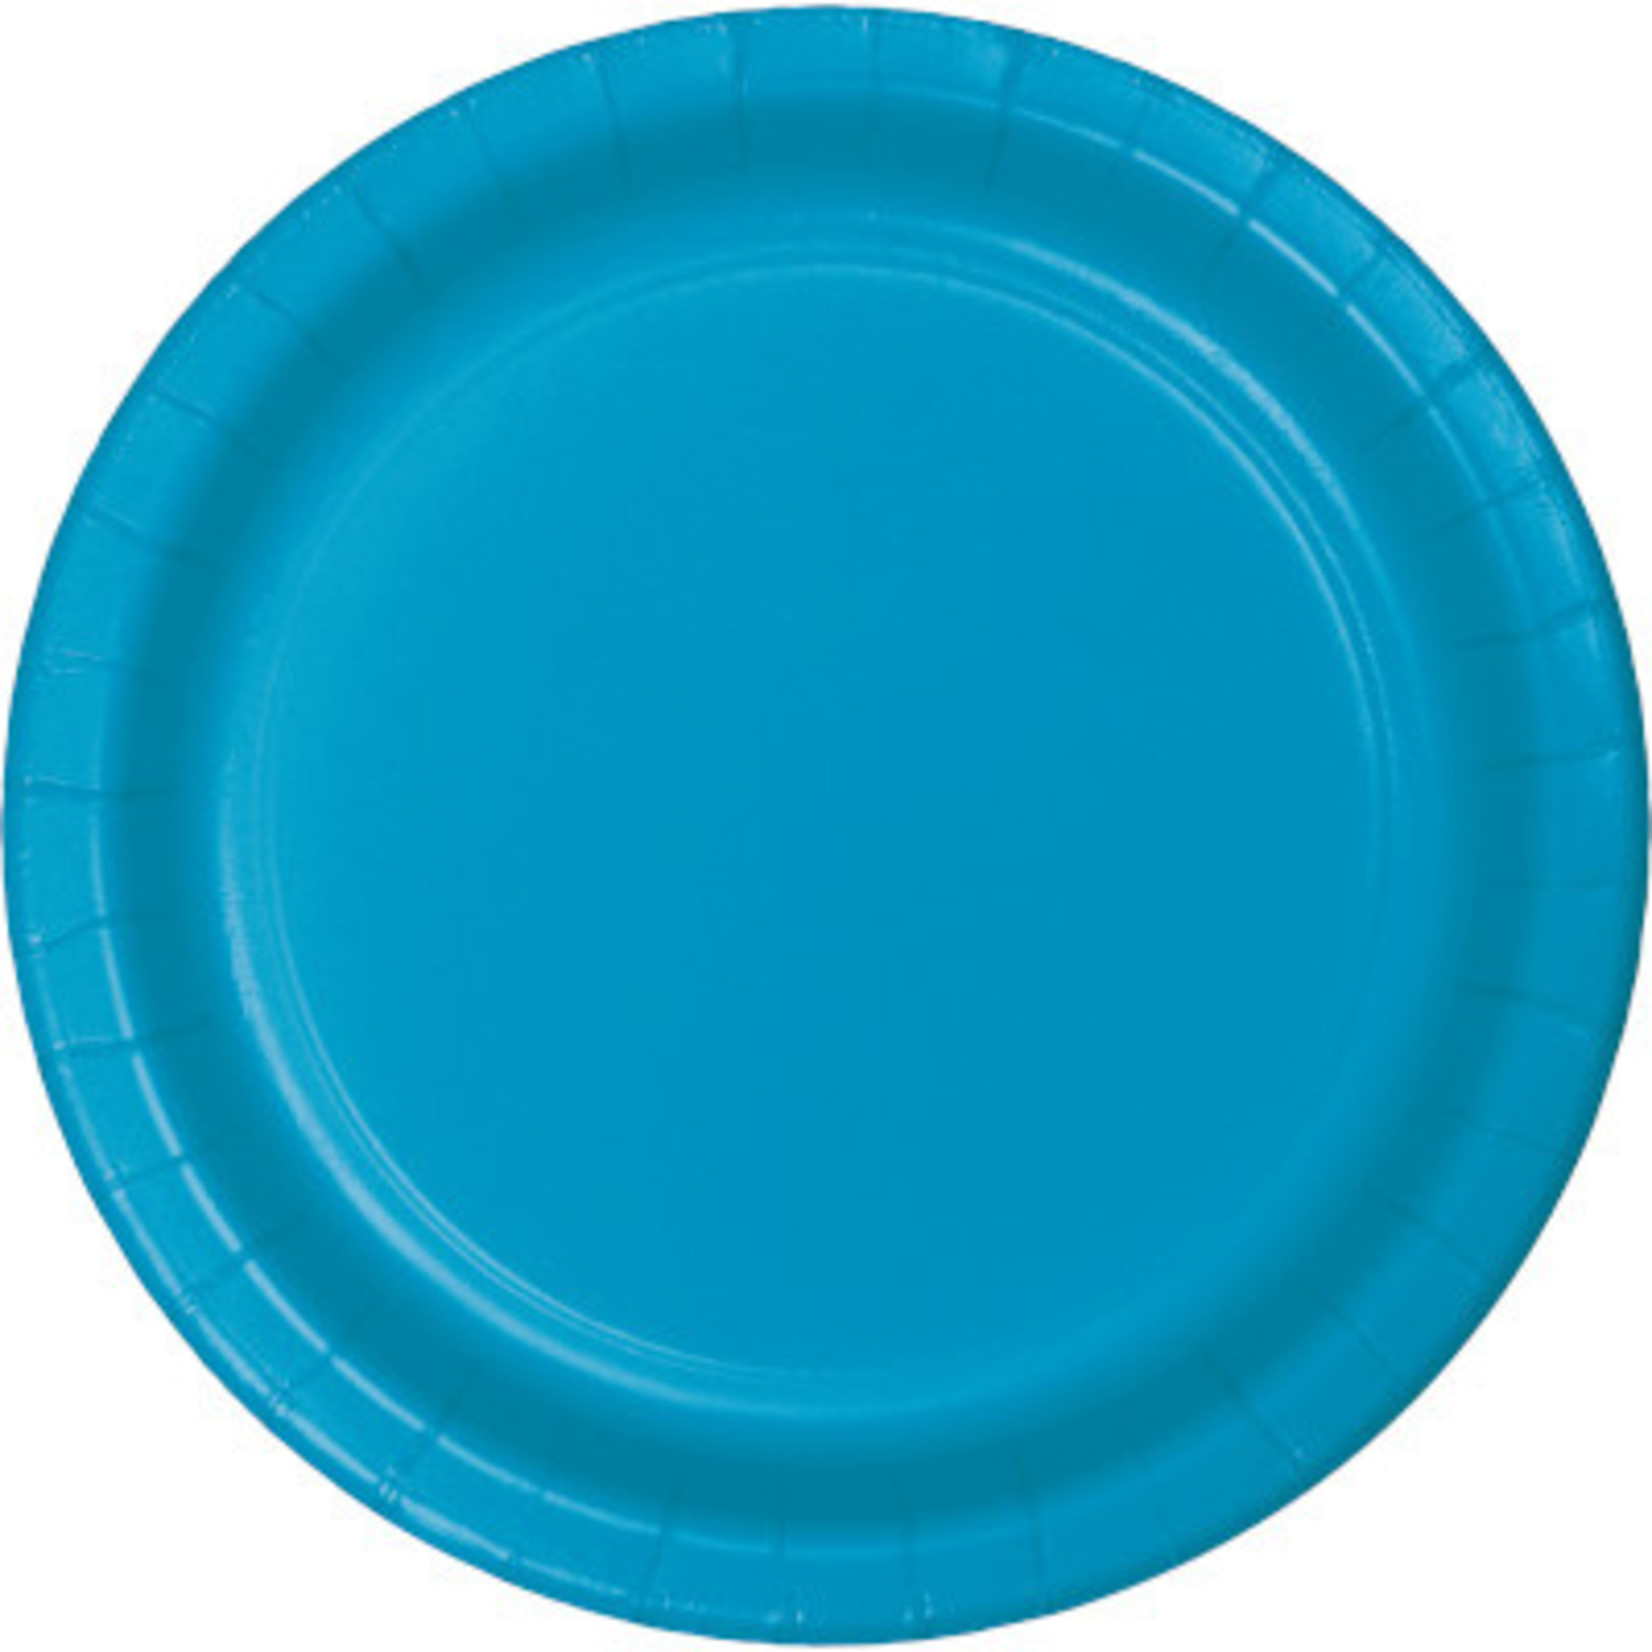 Touch of Color 7" Turquoise Blue Paper Plates - 24ct.